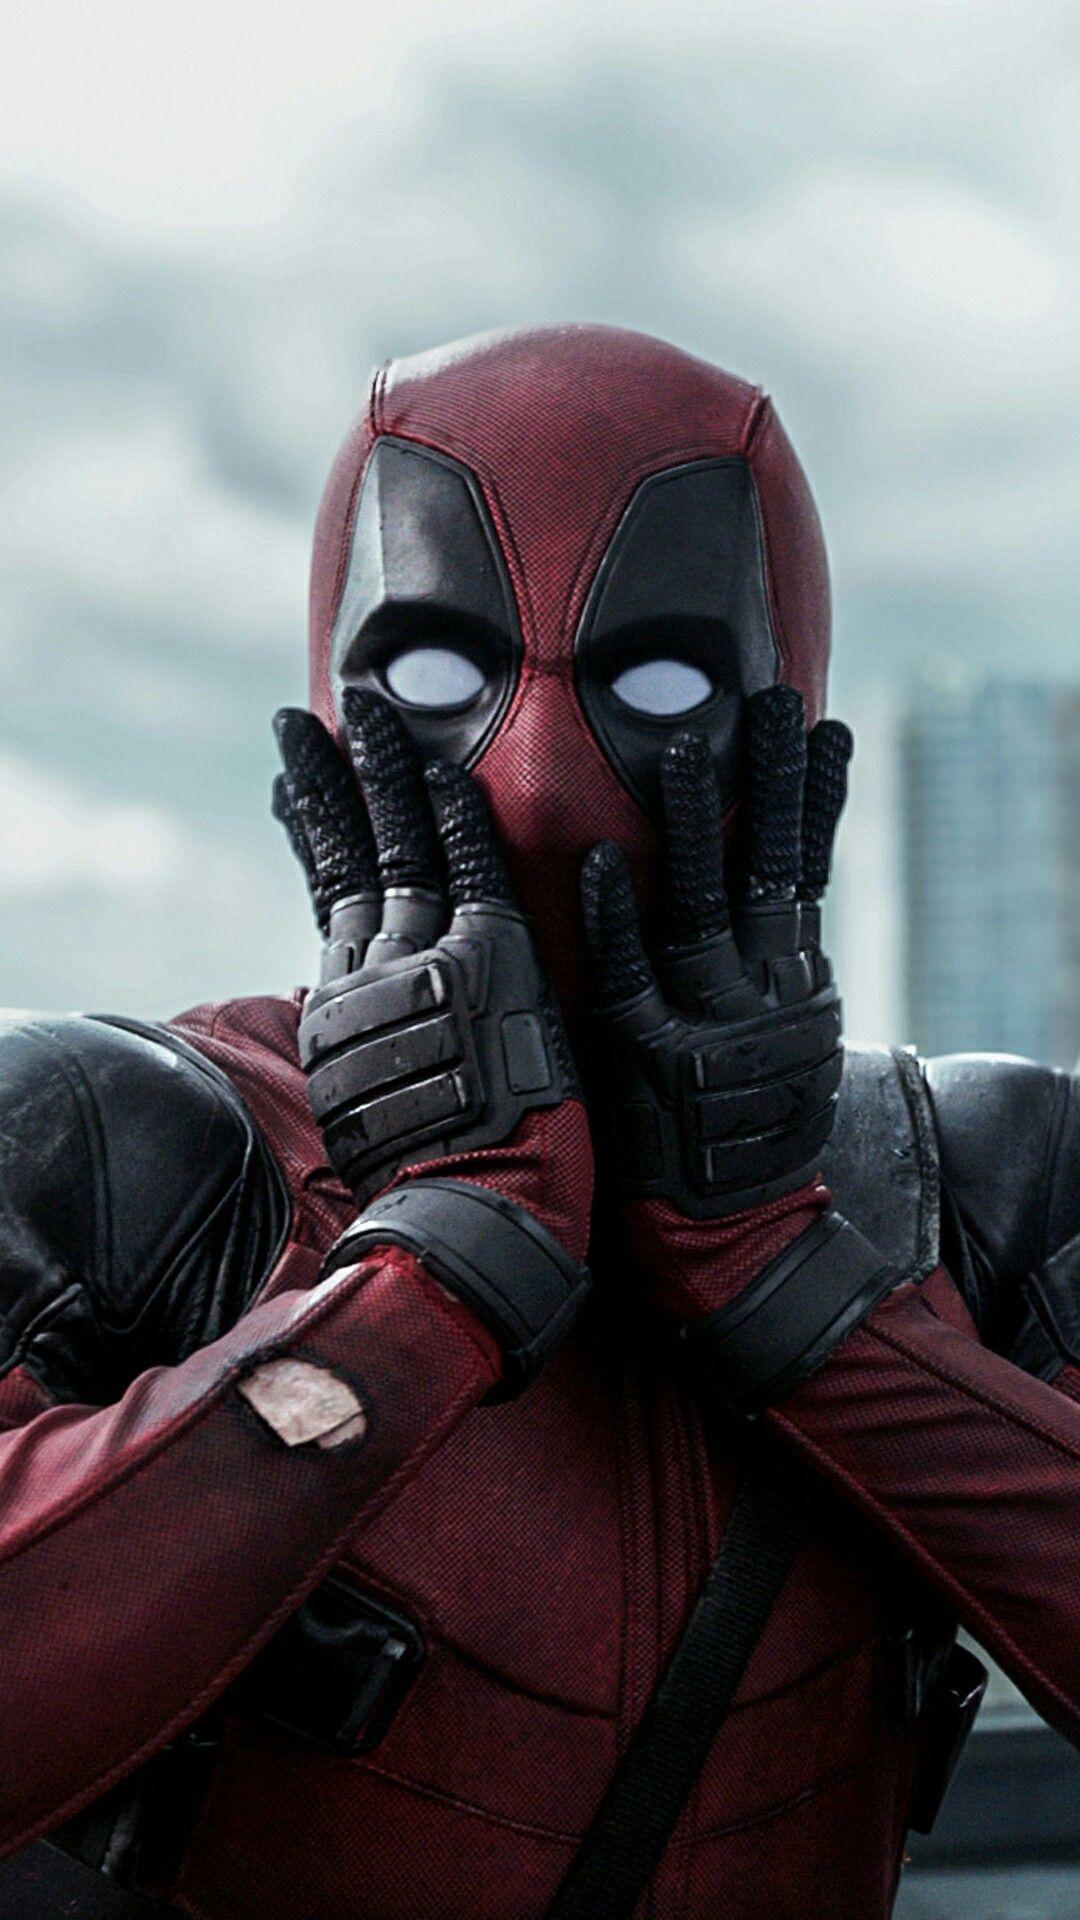 50 Deadpool 2 HD Wallpapers and Backgrounds